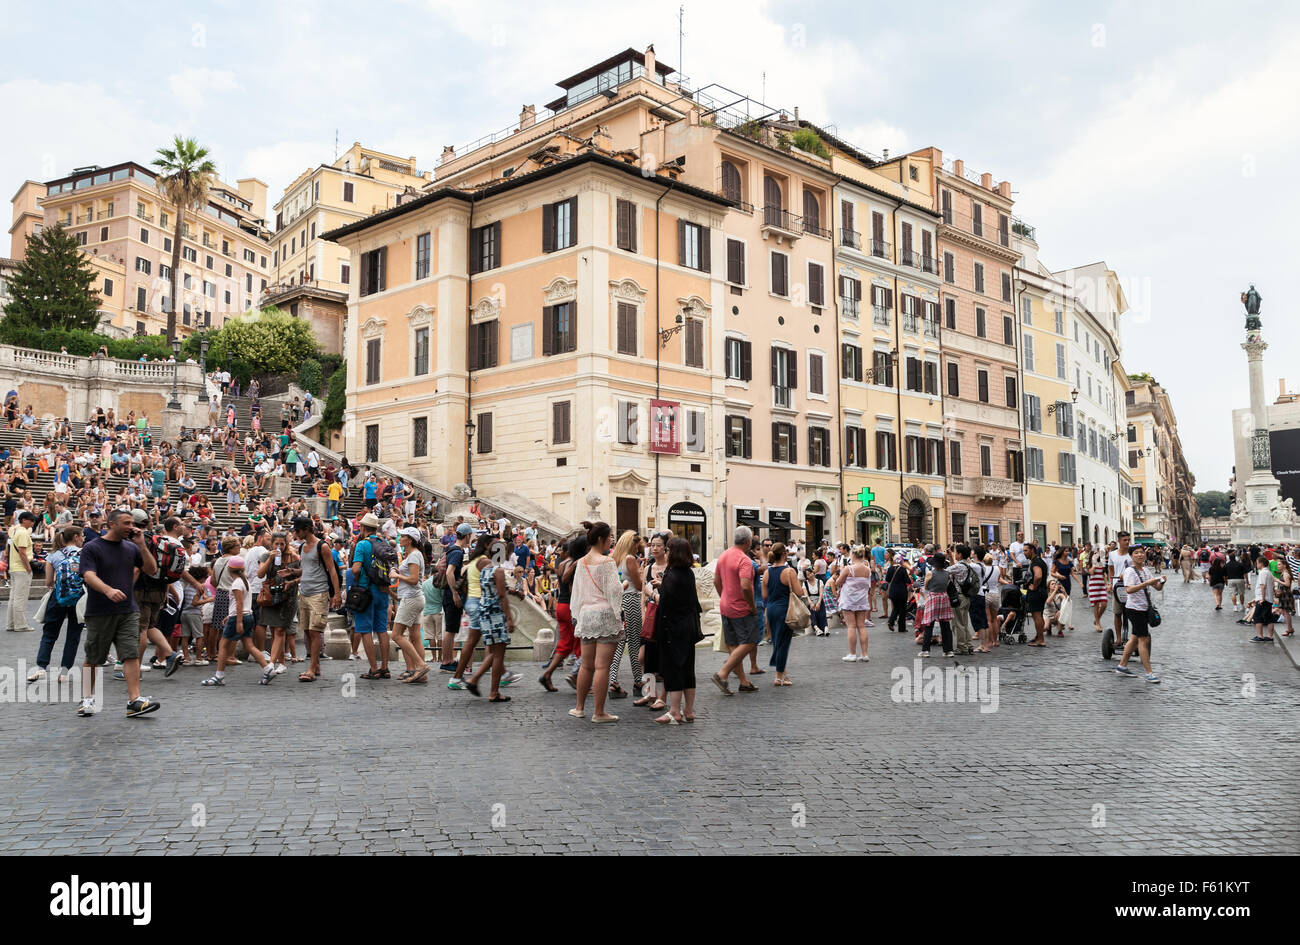 Rome, Italy - August 7, 2015: Crowd of tourists walking around Fontana della Barcaccia on the Piazza di Spagna, summer day Stock Photo